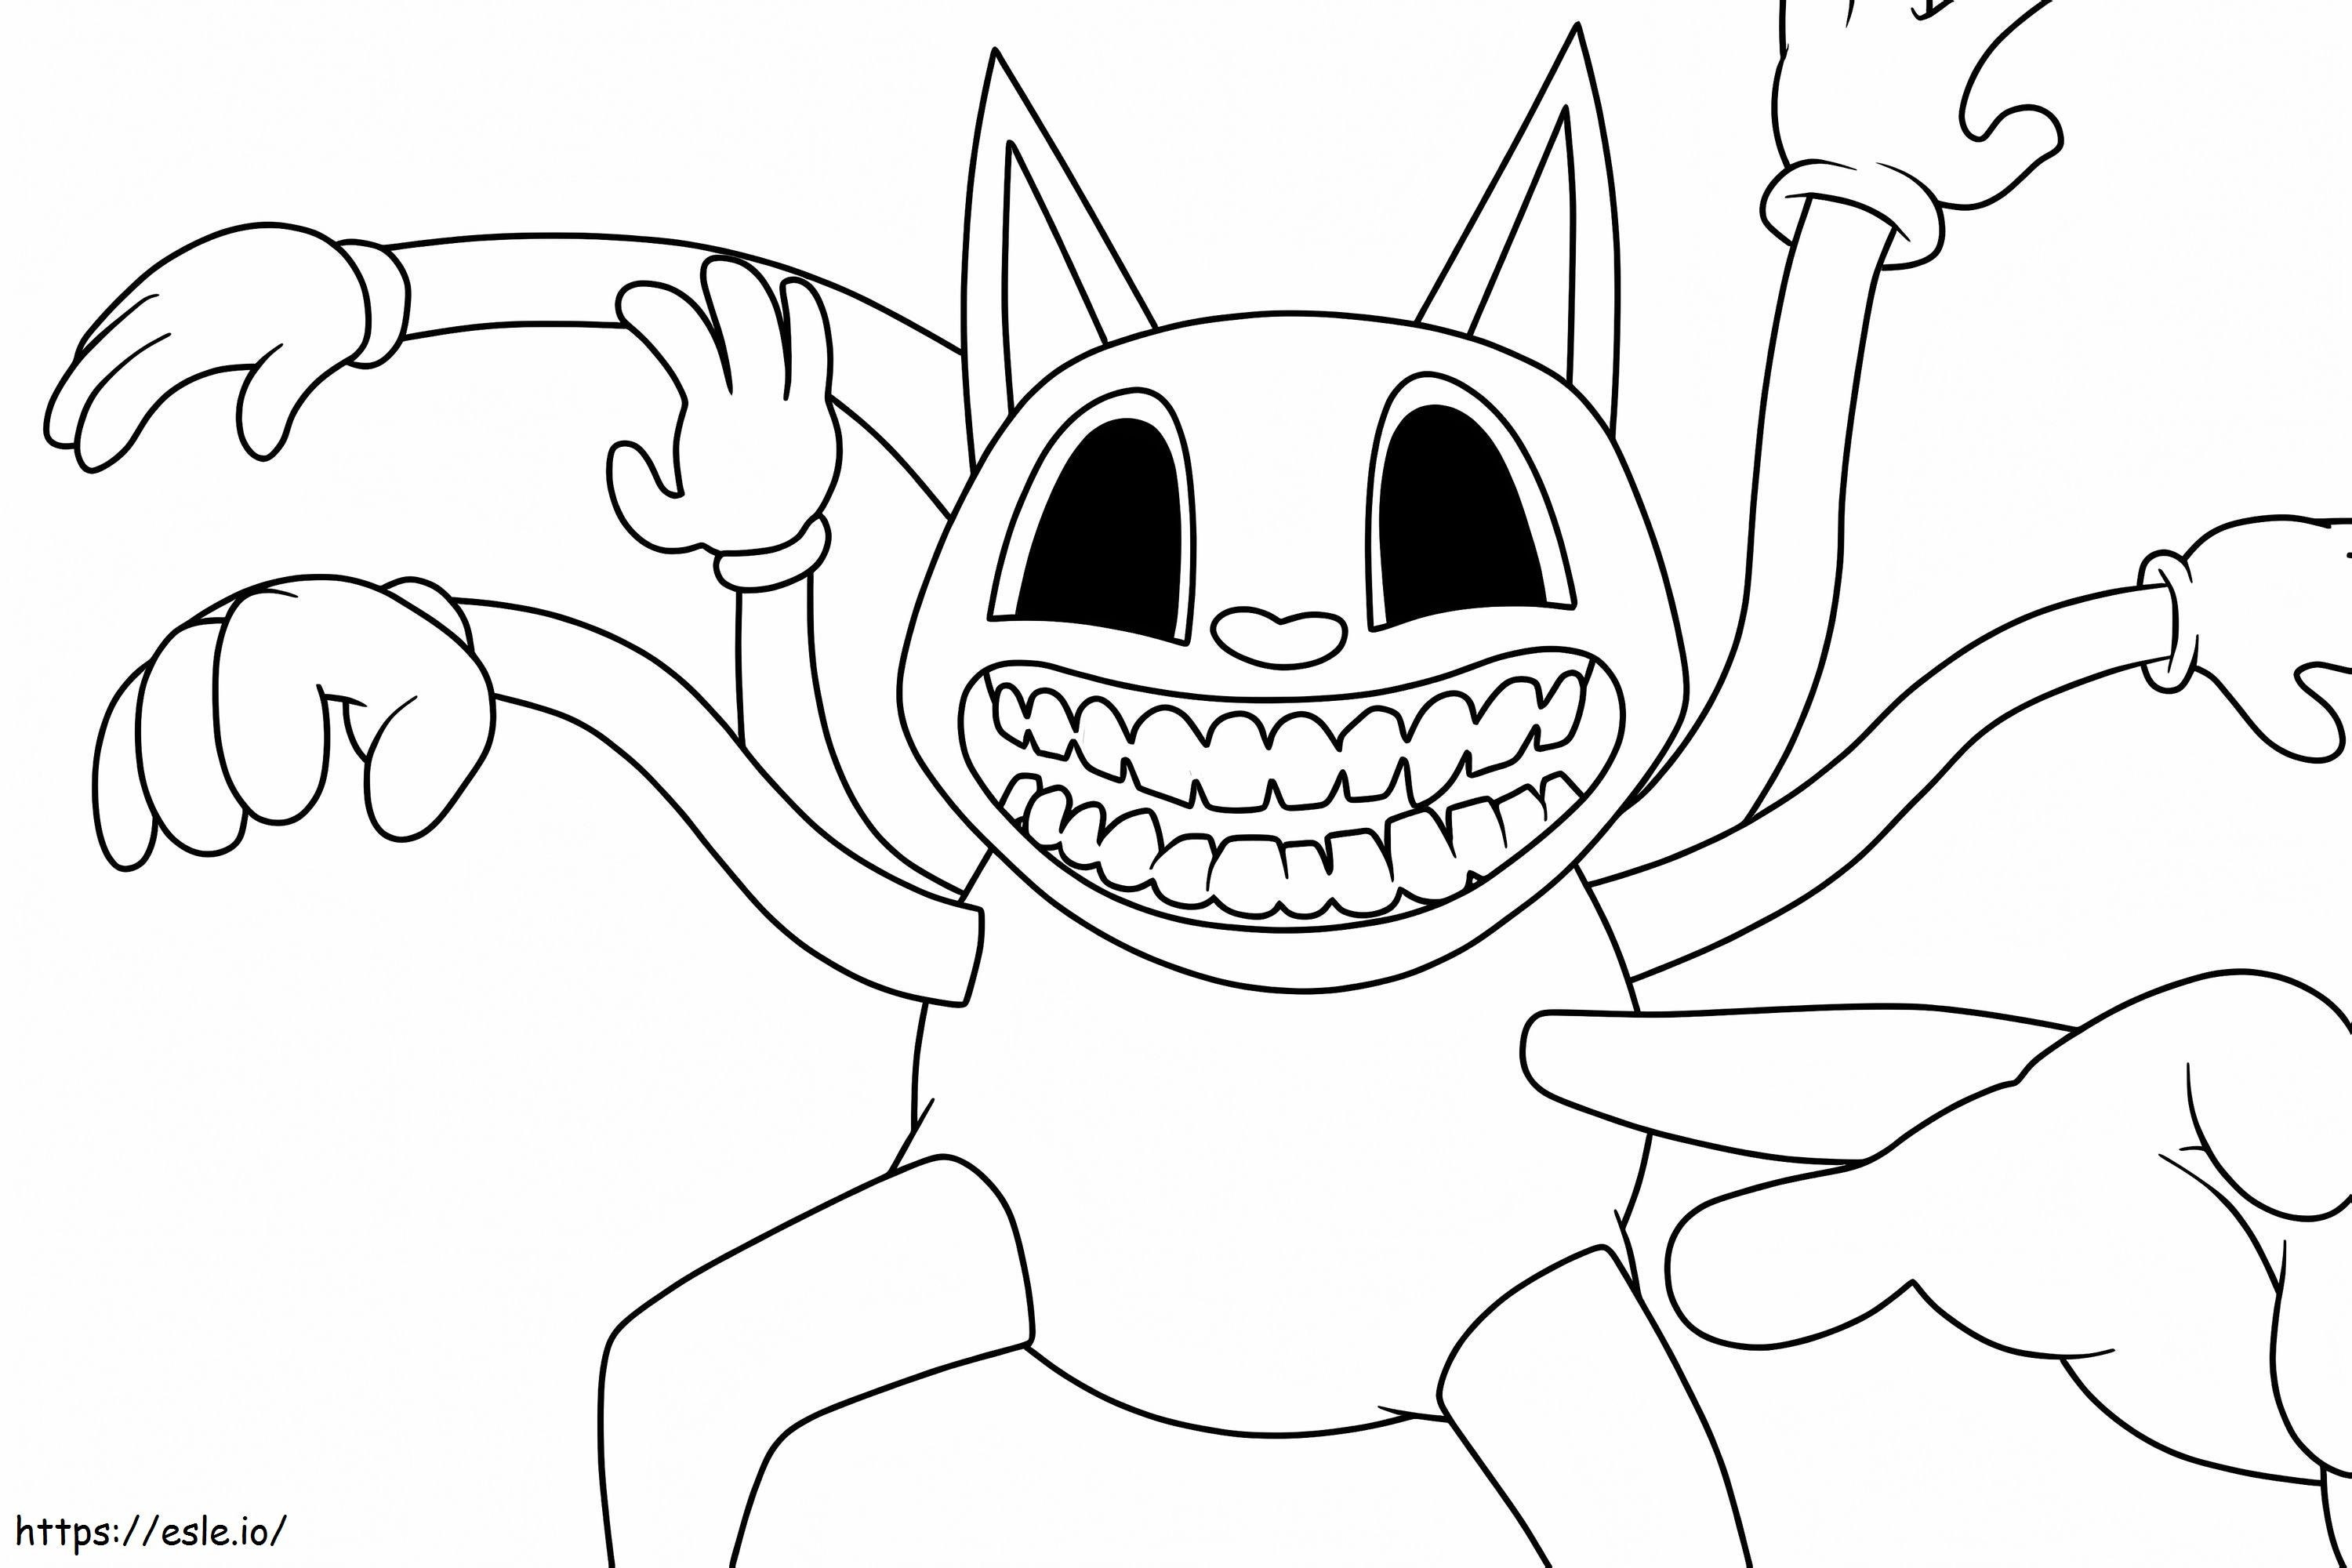 Cartoon Cat 2 coloring page